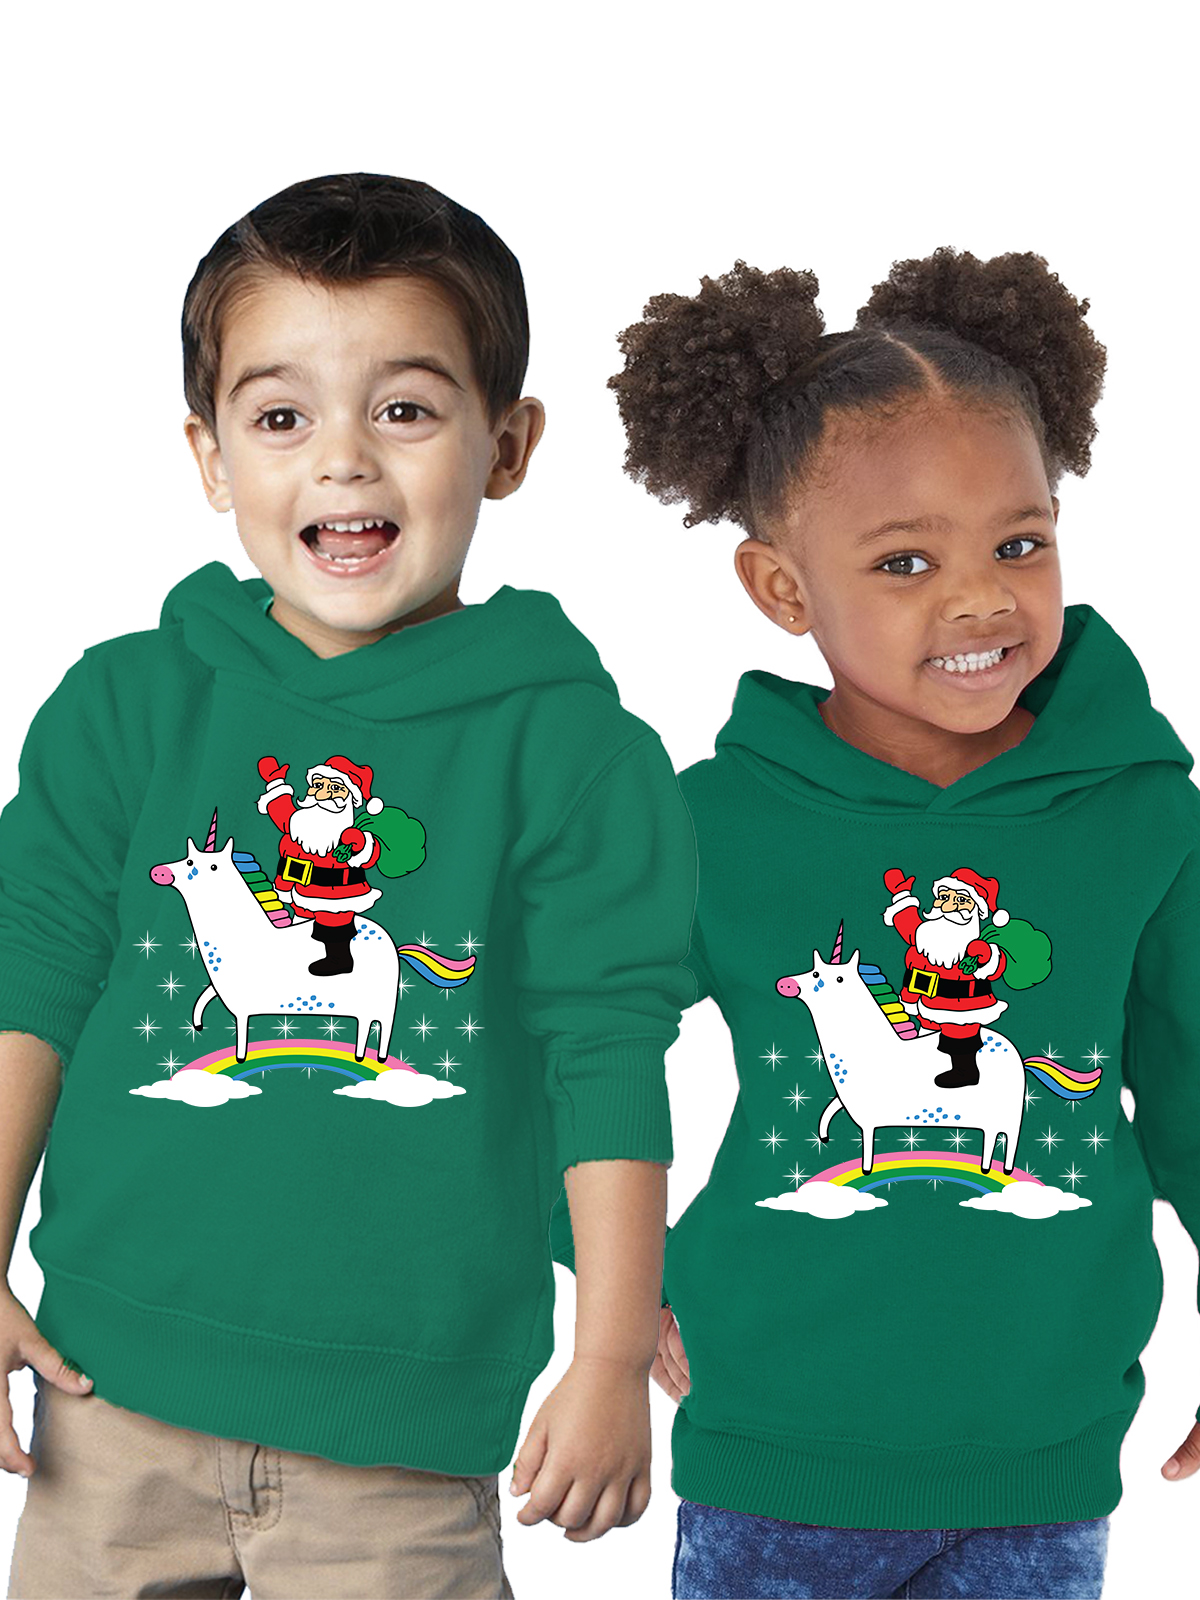 Awkward Styles Irish Day Toddler Hoodie Pug in Green Hat Hooded Sweatshirt for Kids Patrick's Day - image 2 of 4